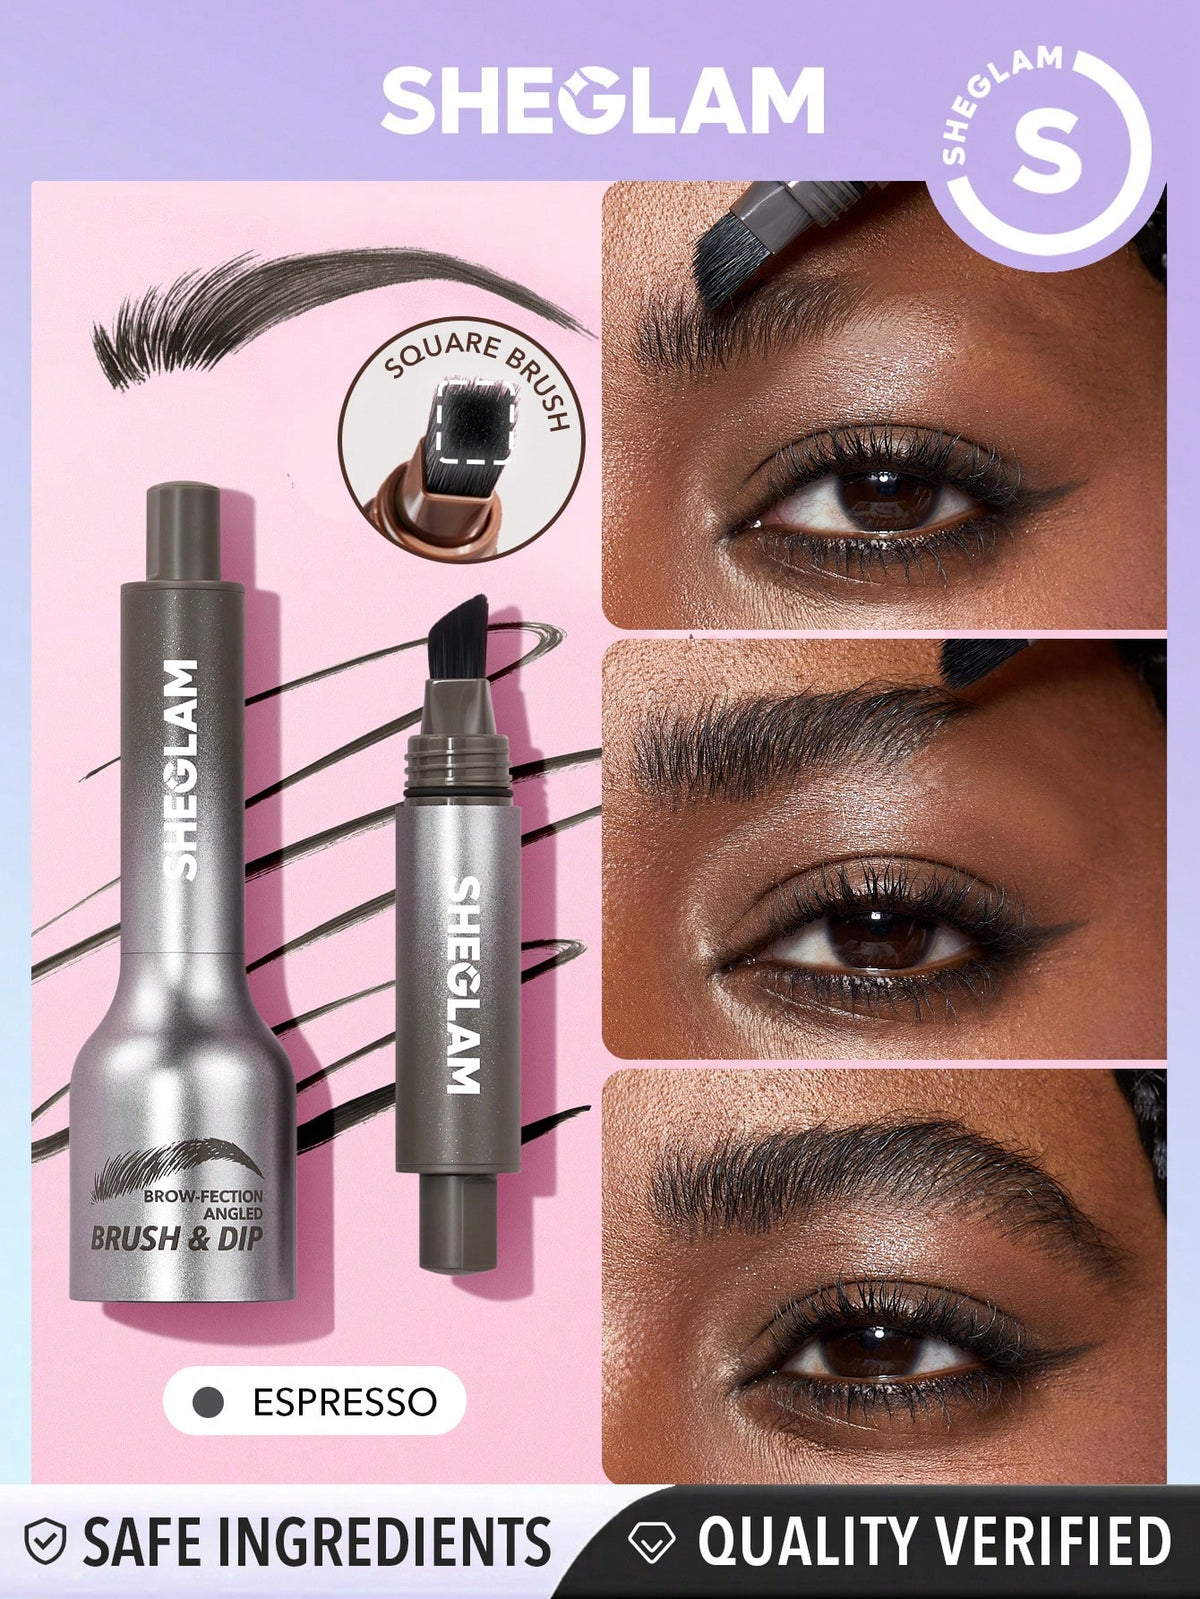 SHEGLAM Brow-Fection Angled Brush & Dip-Espresso Hair-Like Strokes Liquid Eyebrow Gel Pen Easy To Color Long Lasting Quick Drying Natural Shaping Outlining Filling Eyebrow Makeup